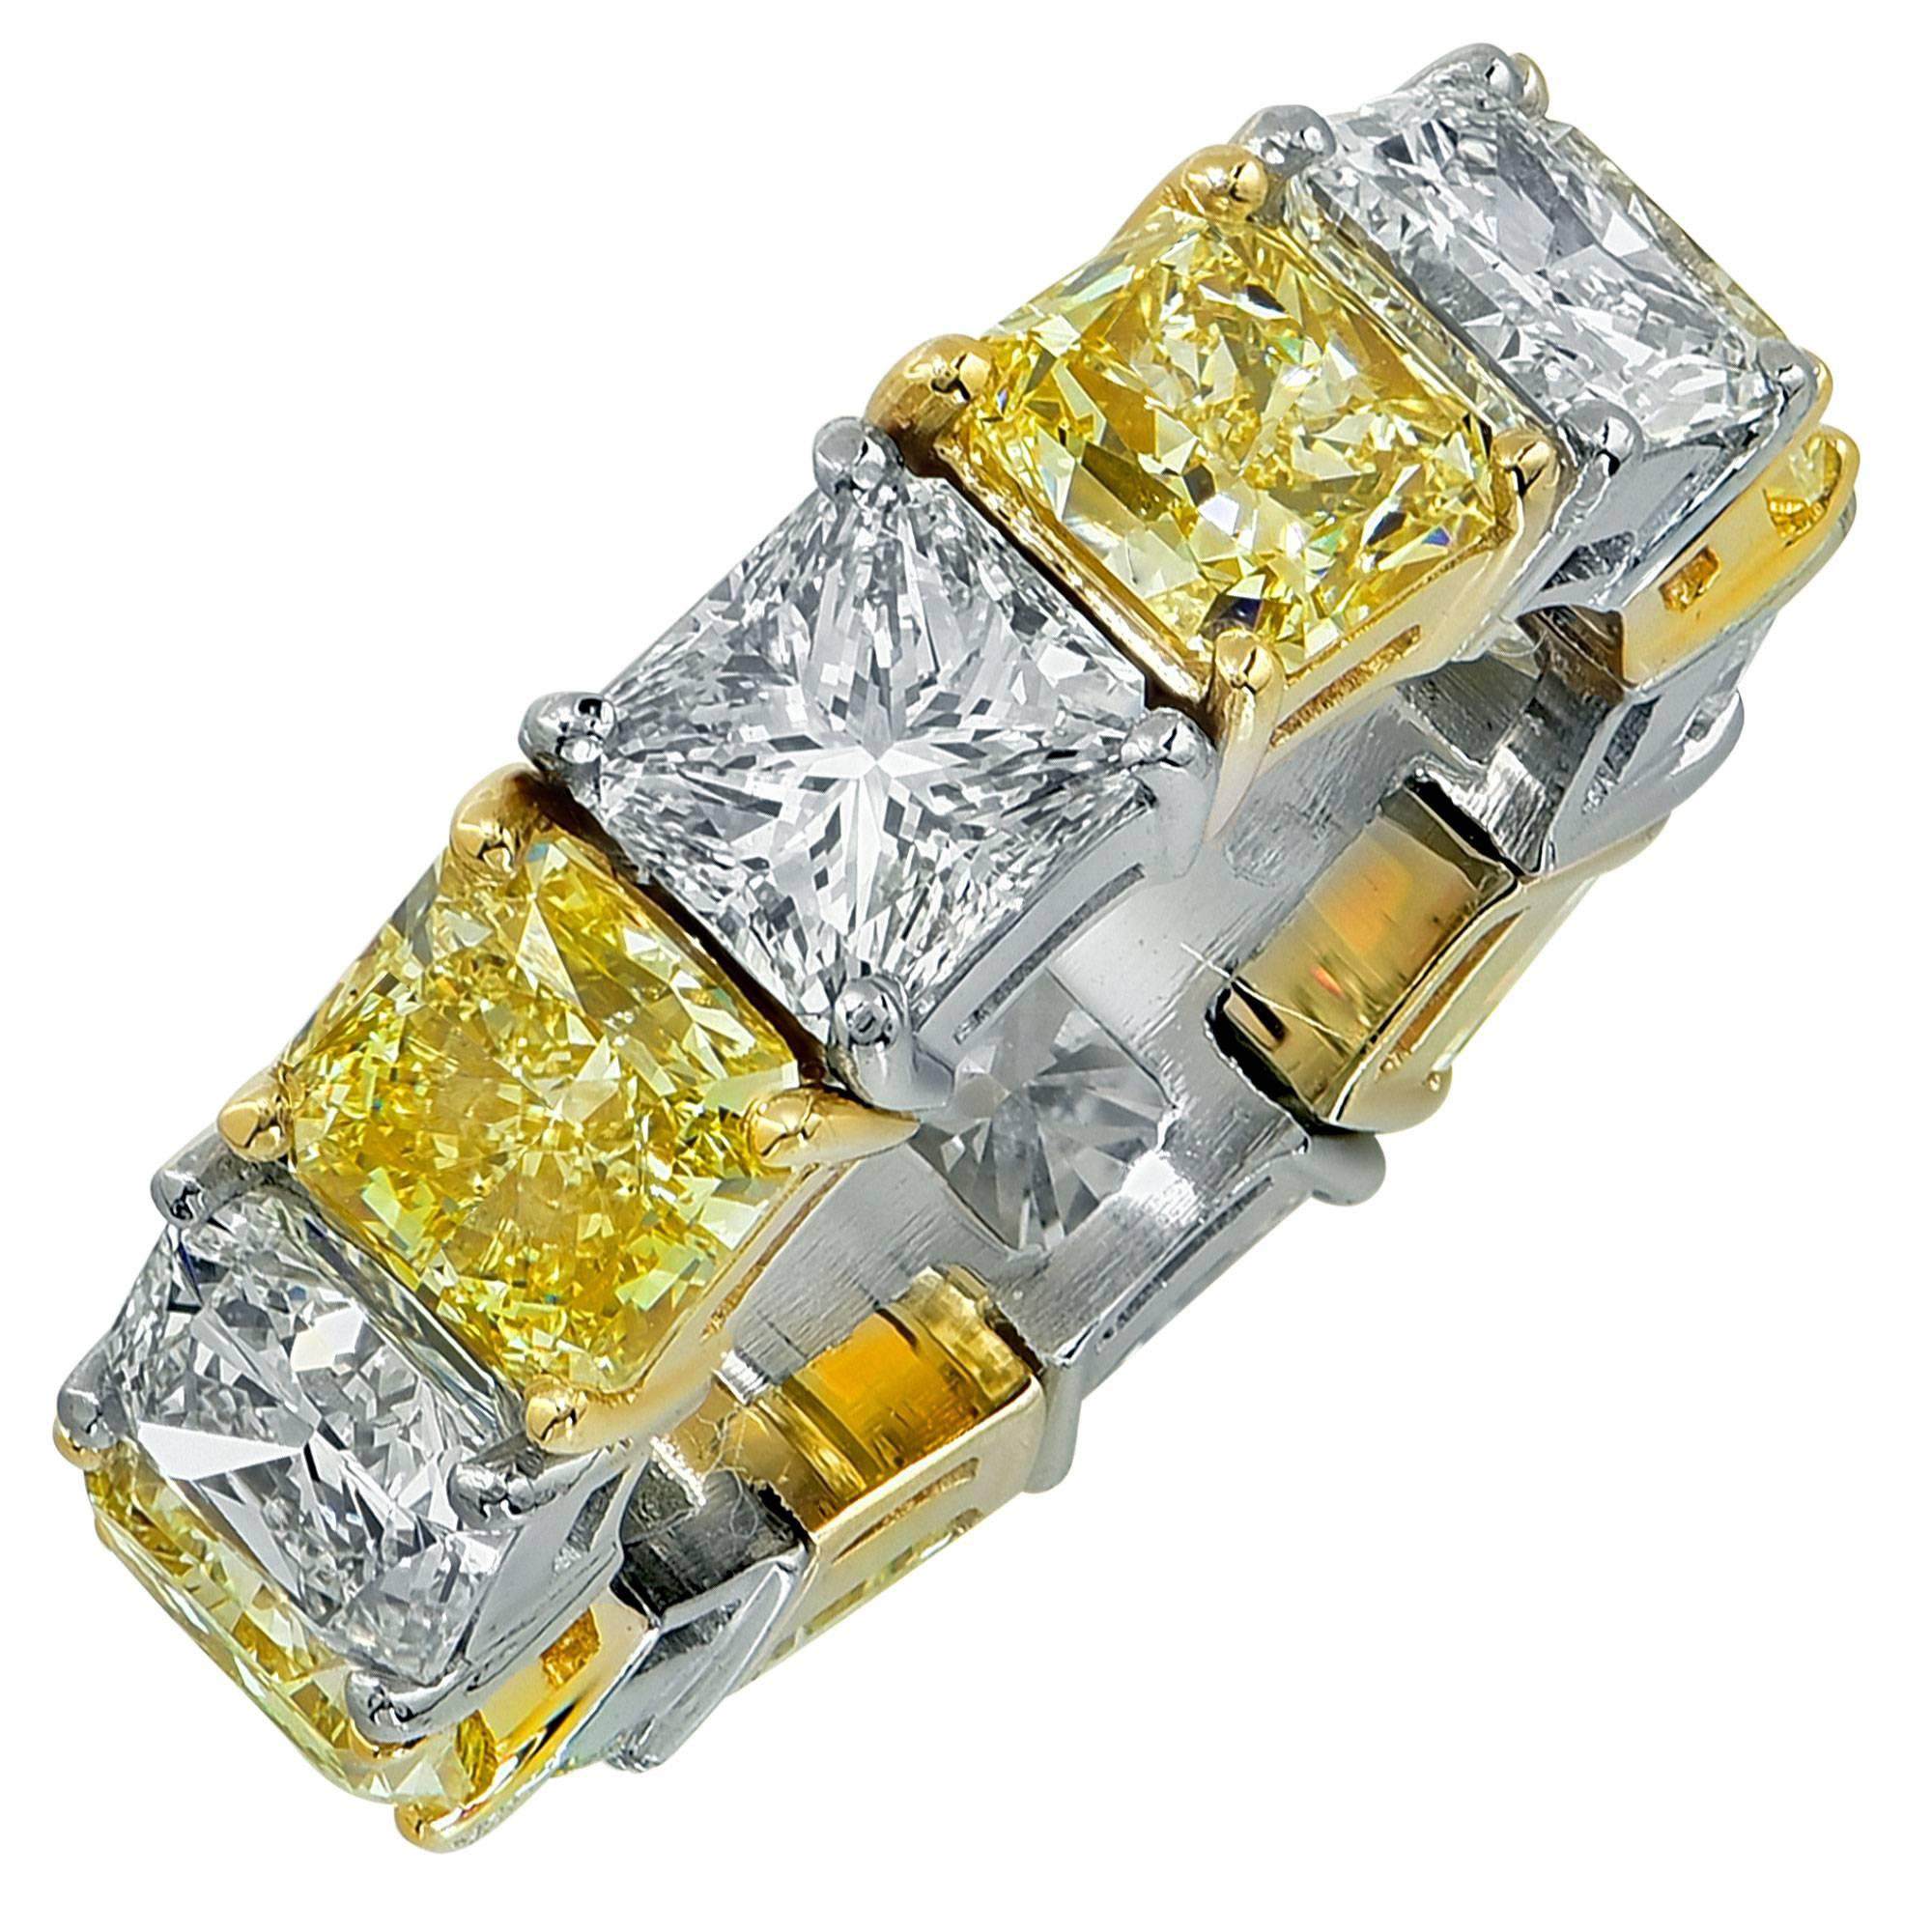 Platinum and 18k yellow gold eternity band featuring 6 GIA graded natural fancy yellow radiant cut diamonds VVS2-VS2 clarity weighing 7.45cts total alternating 6 GIA graded radiant cut diamonds, I-J color VVS2-VS2 clarity weighing 6.22cts